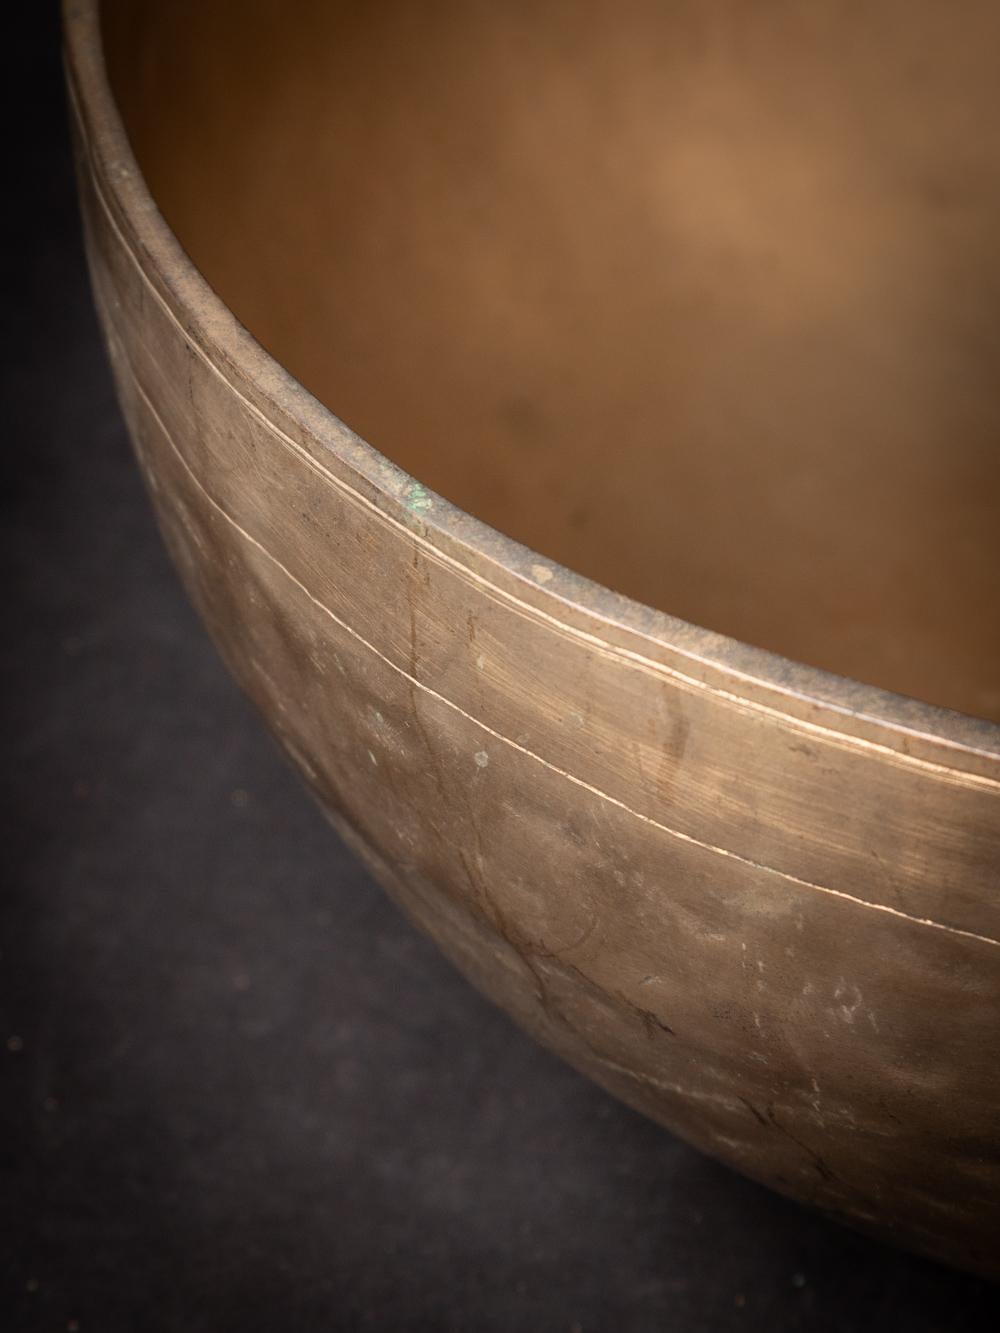 This antique bronze Nepali Singing bowl originates from Nepal and dates back to the early 20th century. Crafted from bronze, it showcases the rich cultural heritage of Nepal. The bowl stands at a height of 16.9 cm with a diameter of 42.2 cm, making